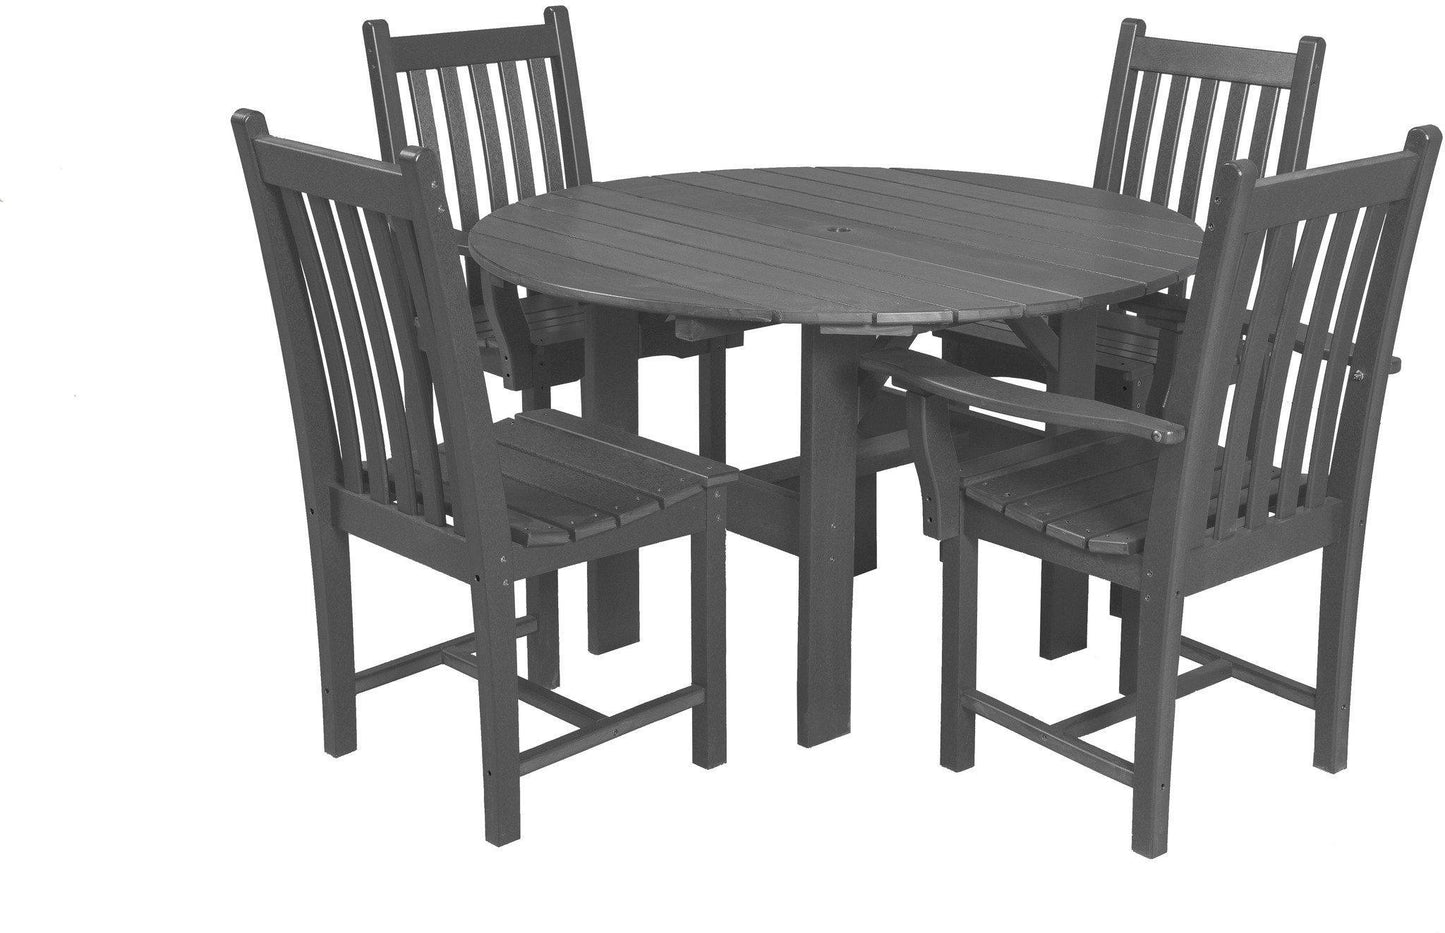 Wildridge Outdoor Recycled Plastic Classic 6 Piece Round Patio Dining Set - LEAD TIME TO SHIP 3 WEEKS